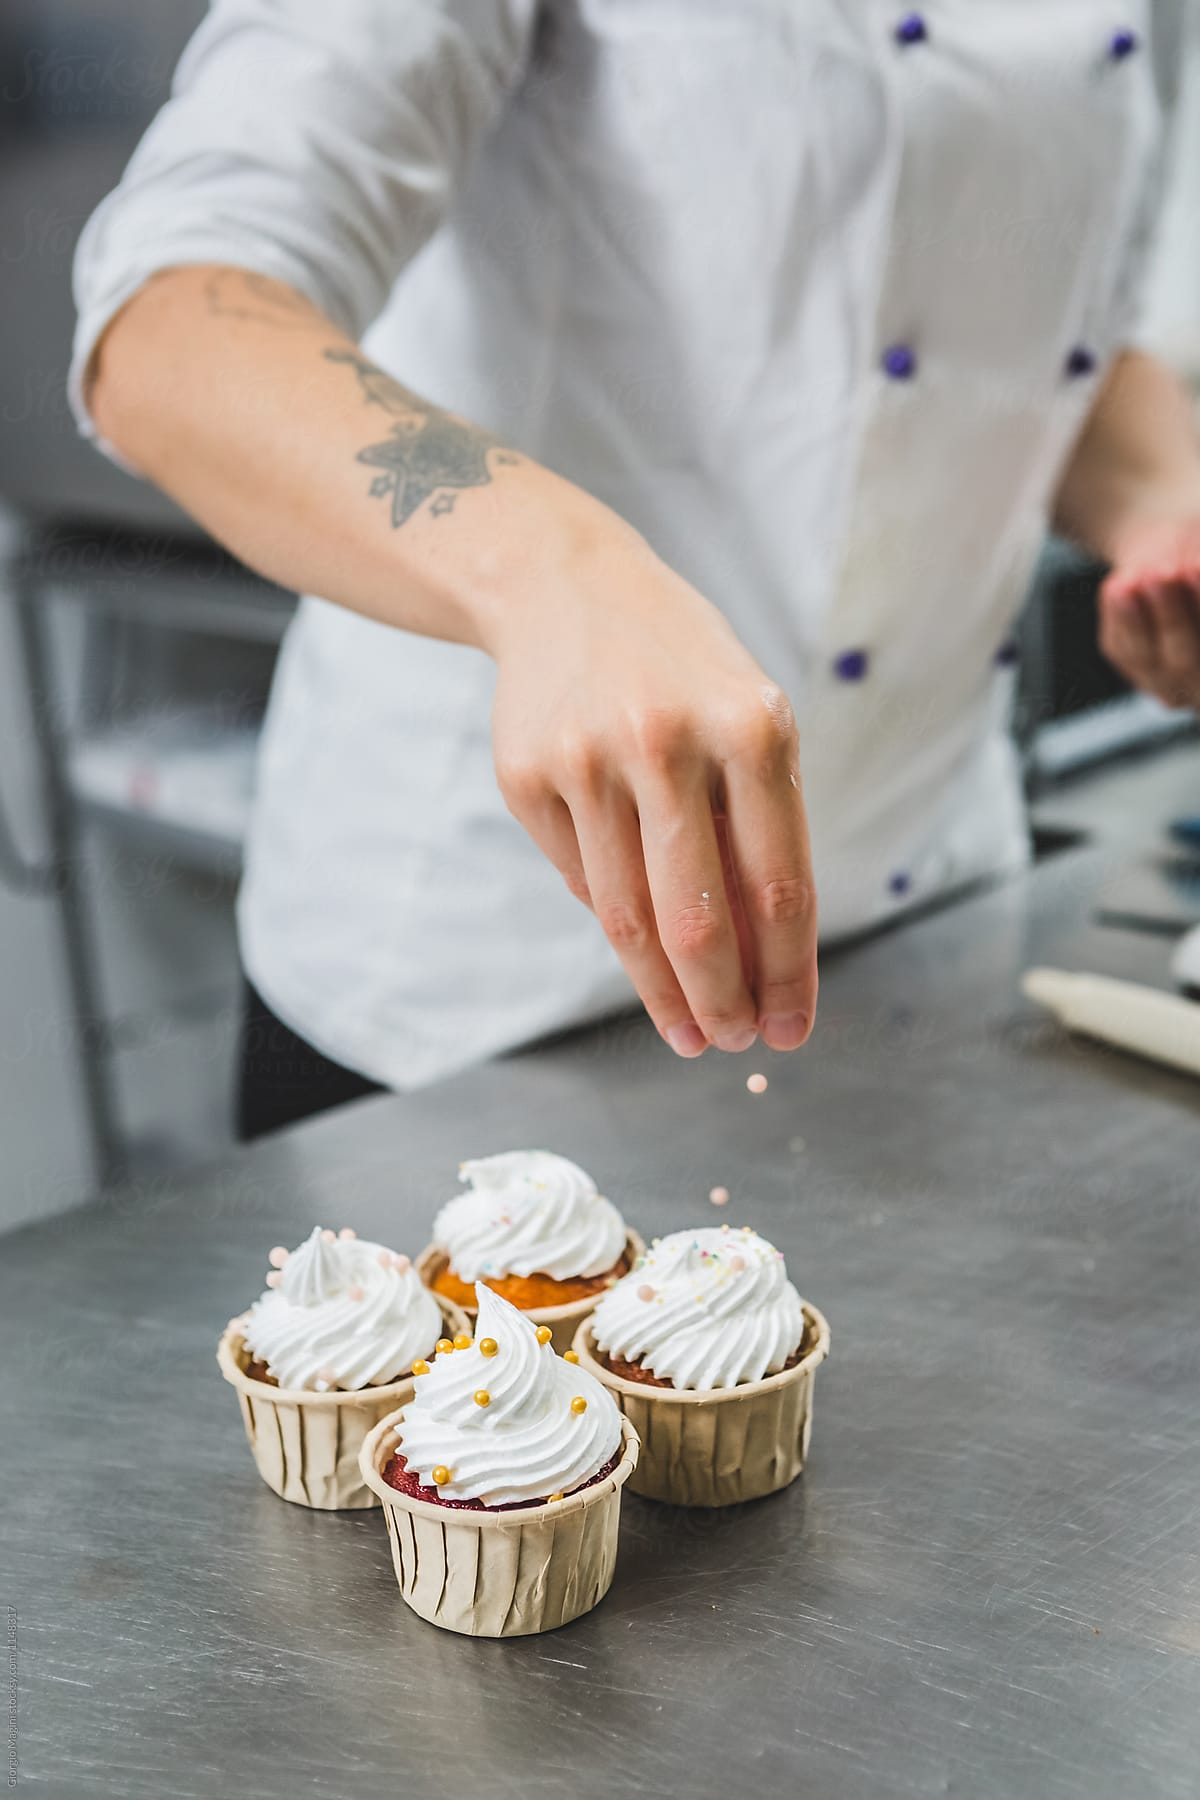 Pastry Chef Preparing Cupcakes in a Professional Kitchen